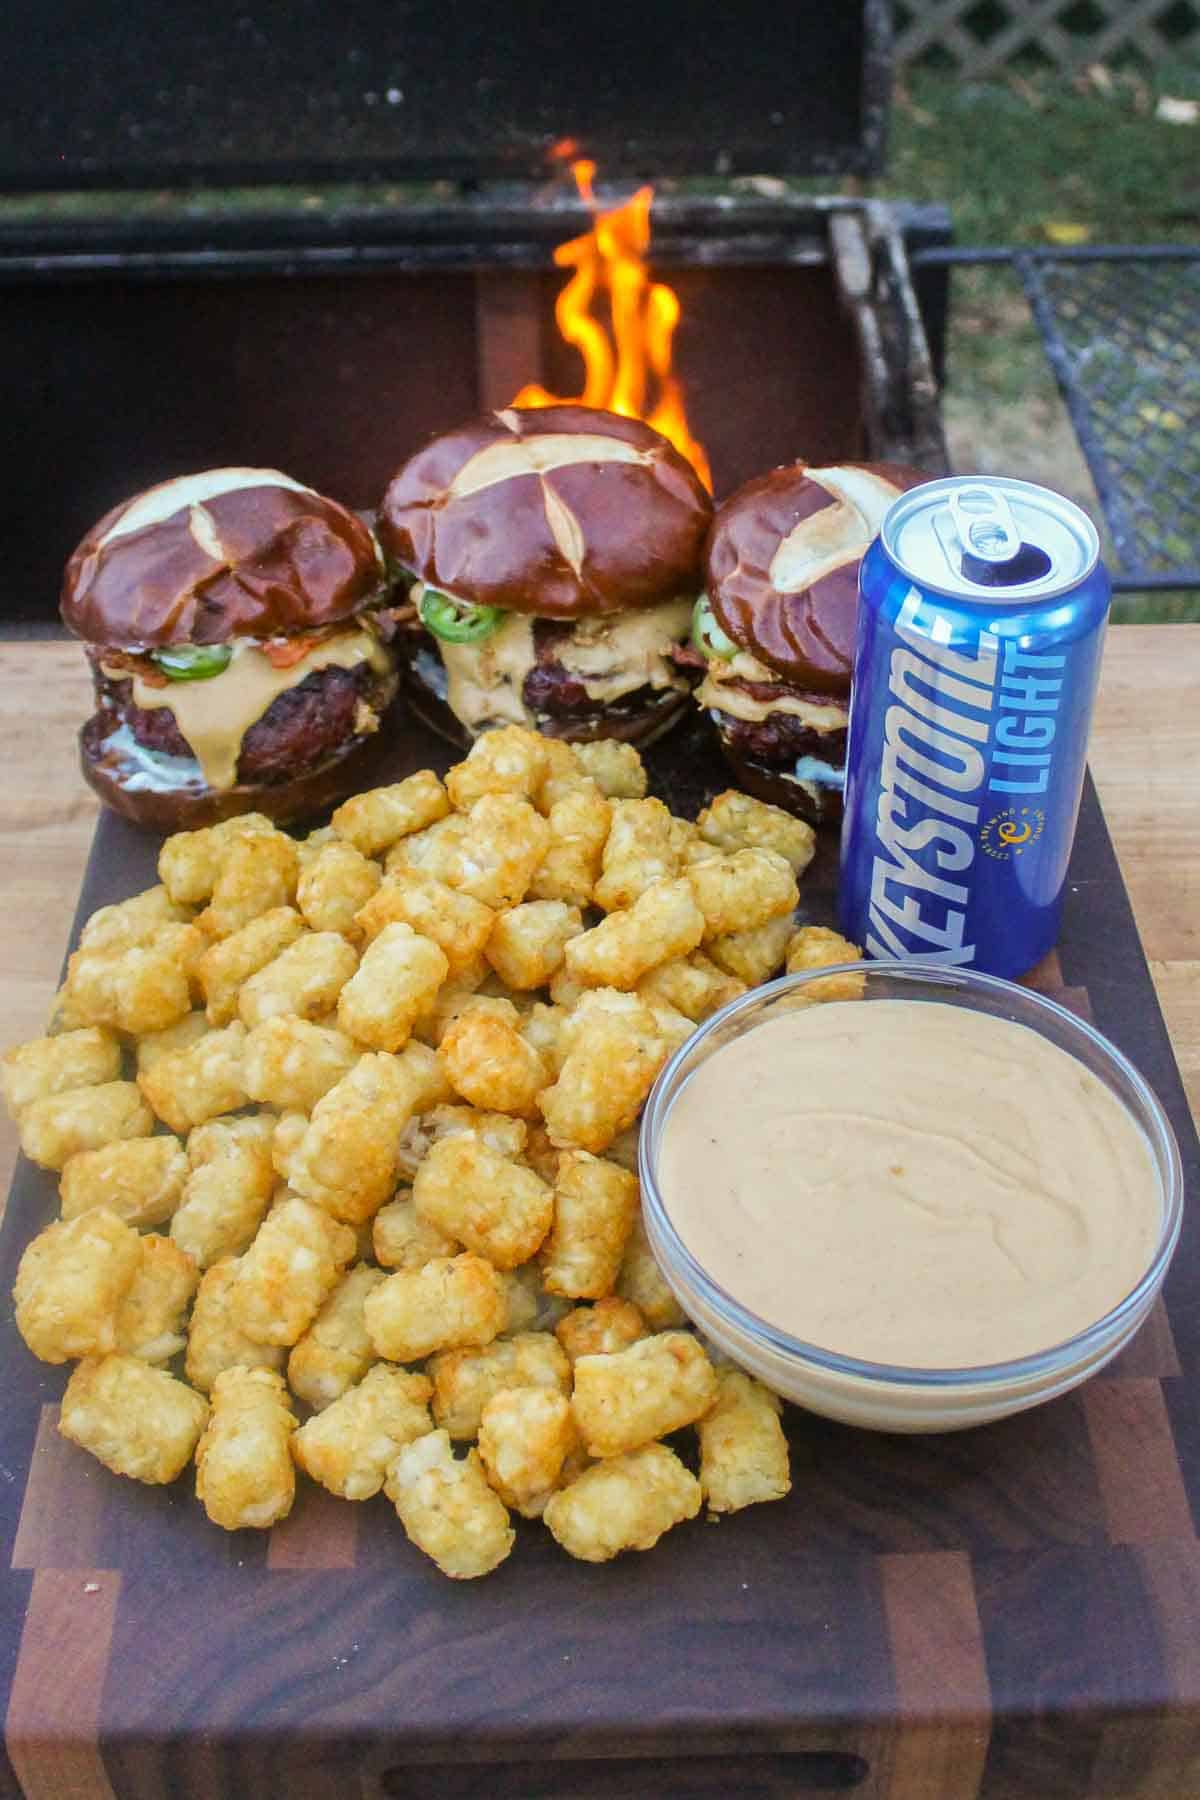 Plated Smoked Venison Burgers with Beer Cheese